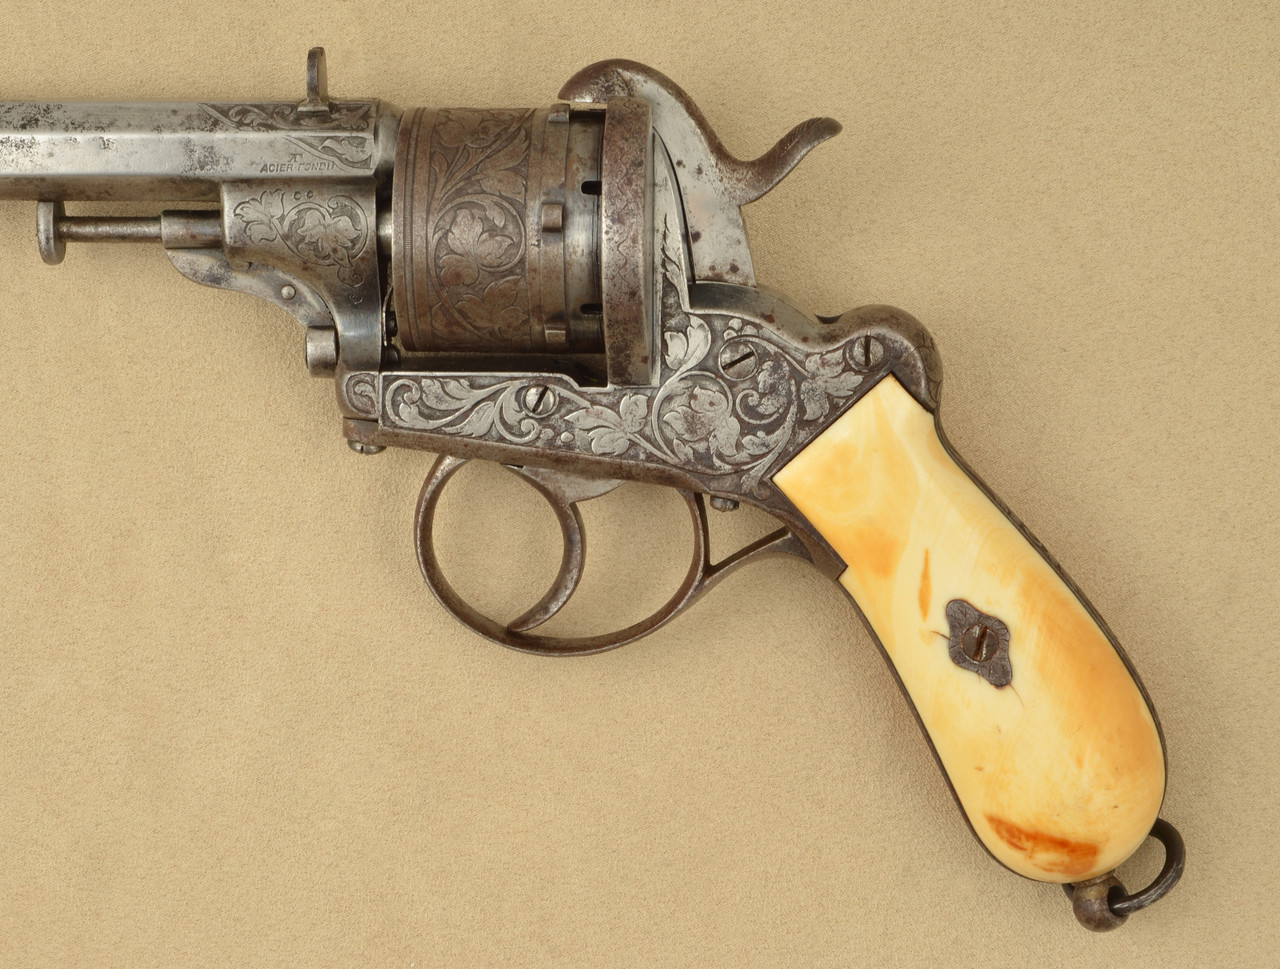 FRENCH PINFIRE REVOLVER - C59905